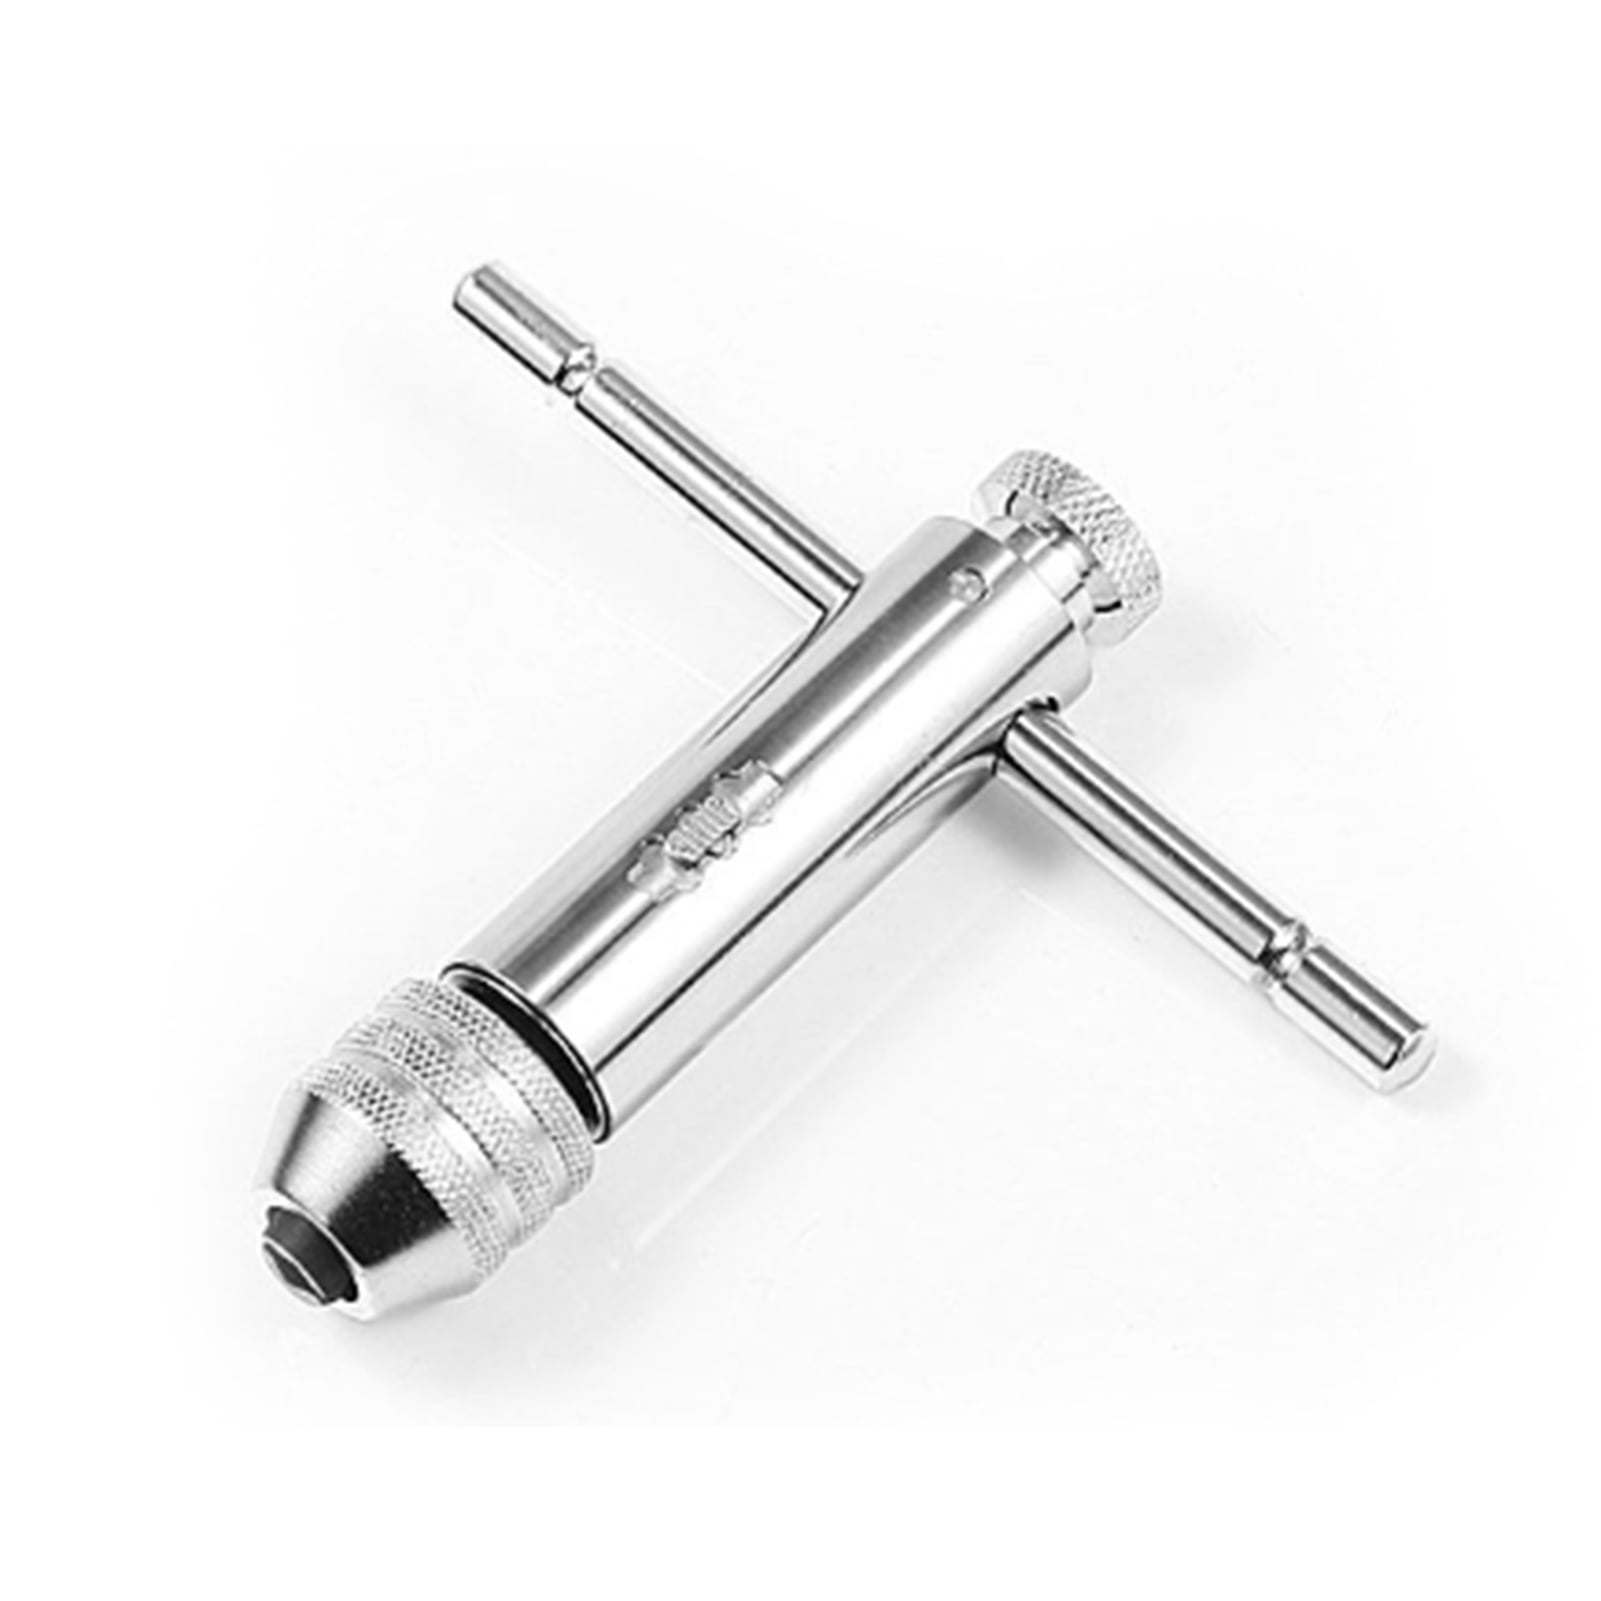 M5-M12 Adjustable T-Handle Ratchet Screw Tap Wrench For Reamer Screw Extractor 